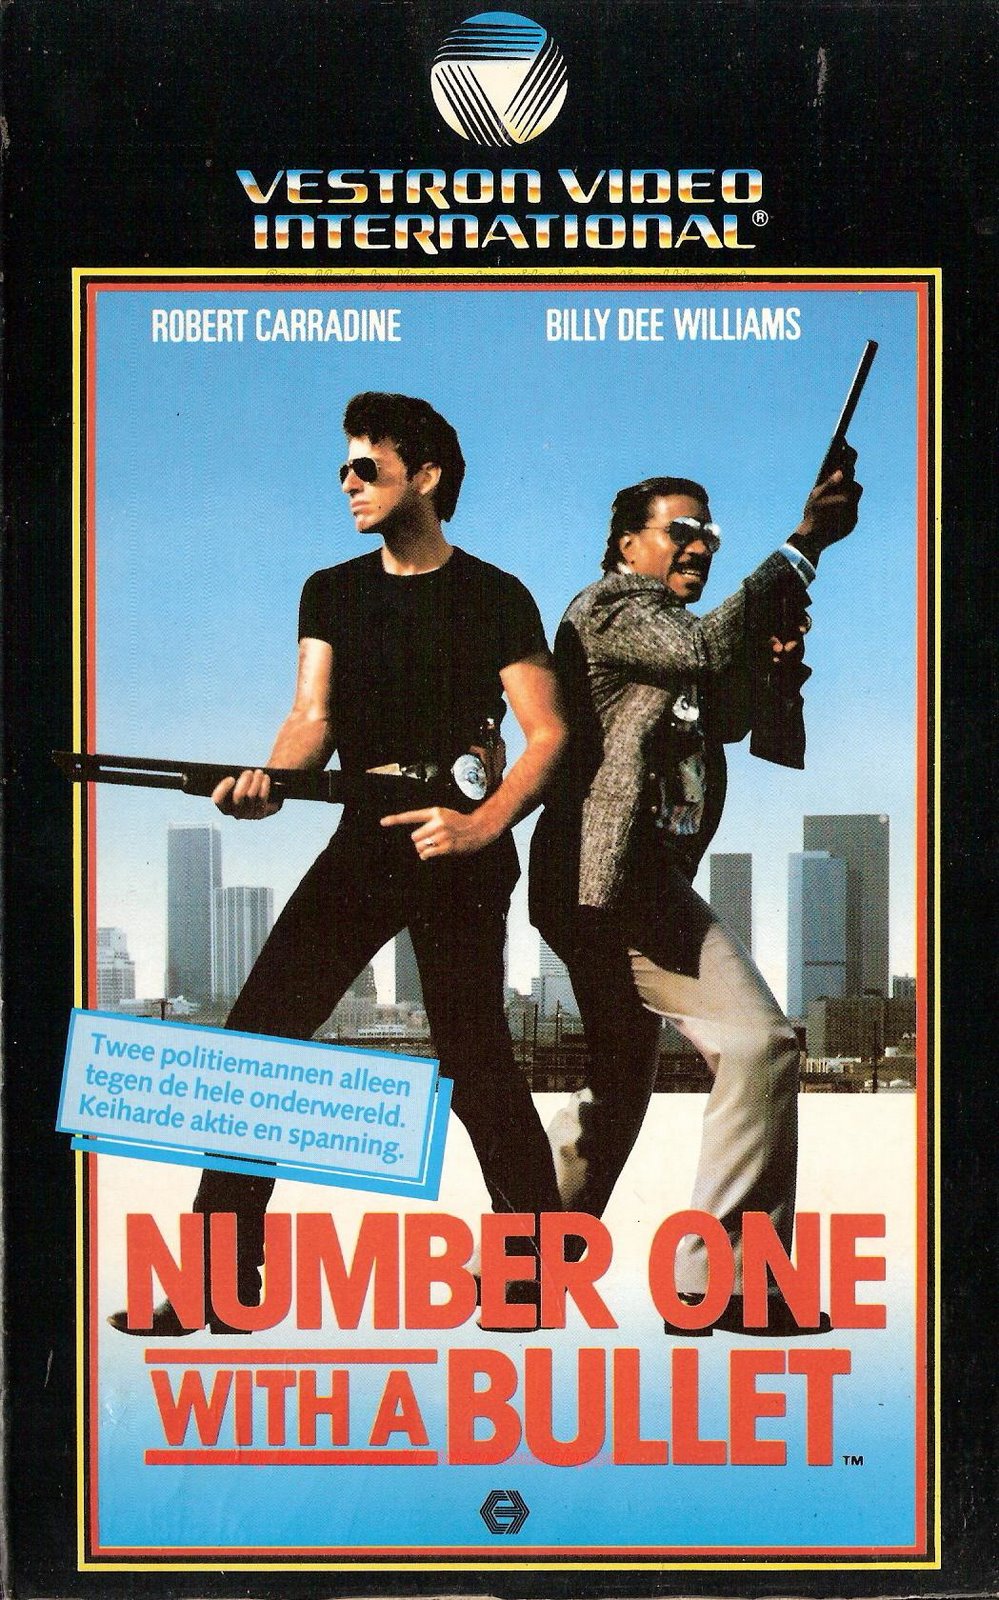 [Number+one+with+a+bullet++-+))FRONT((Scan+Made+by+Vestovestronvideointernational.blogspot.JPG]